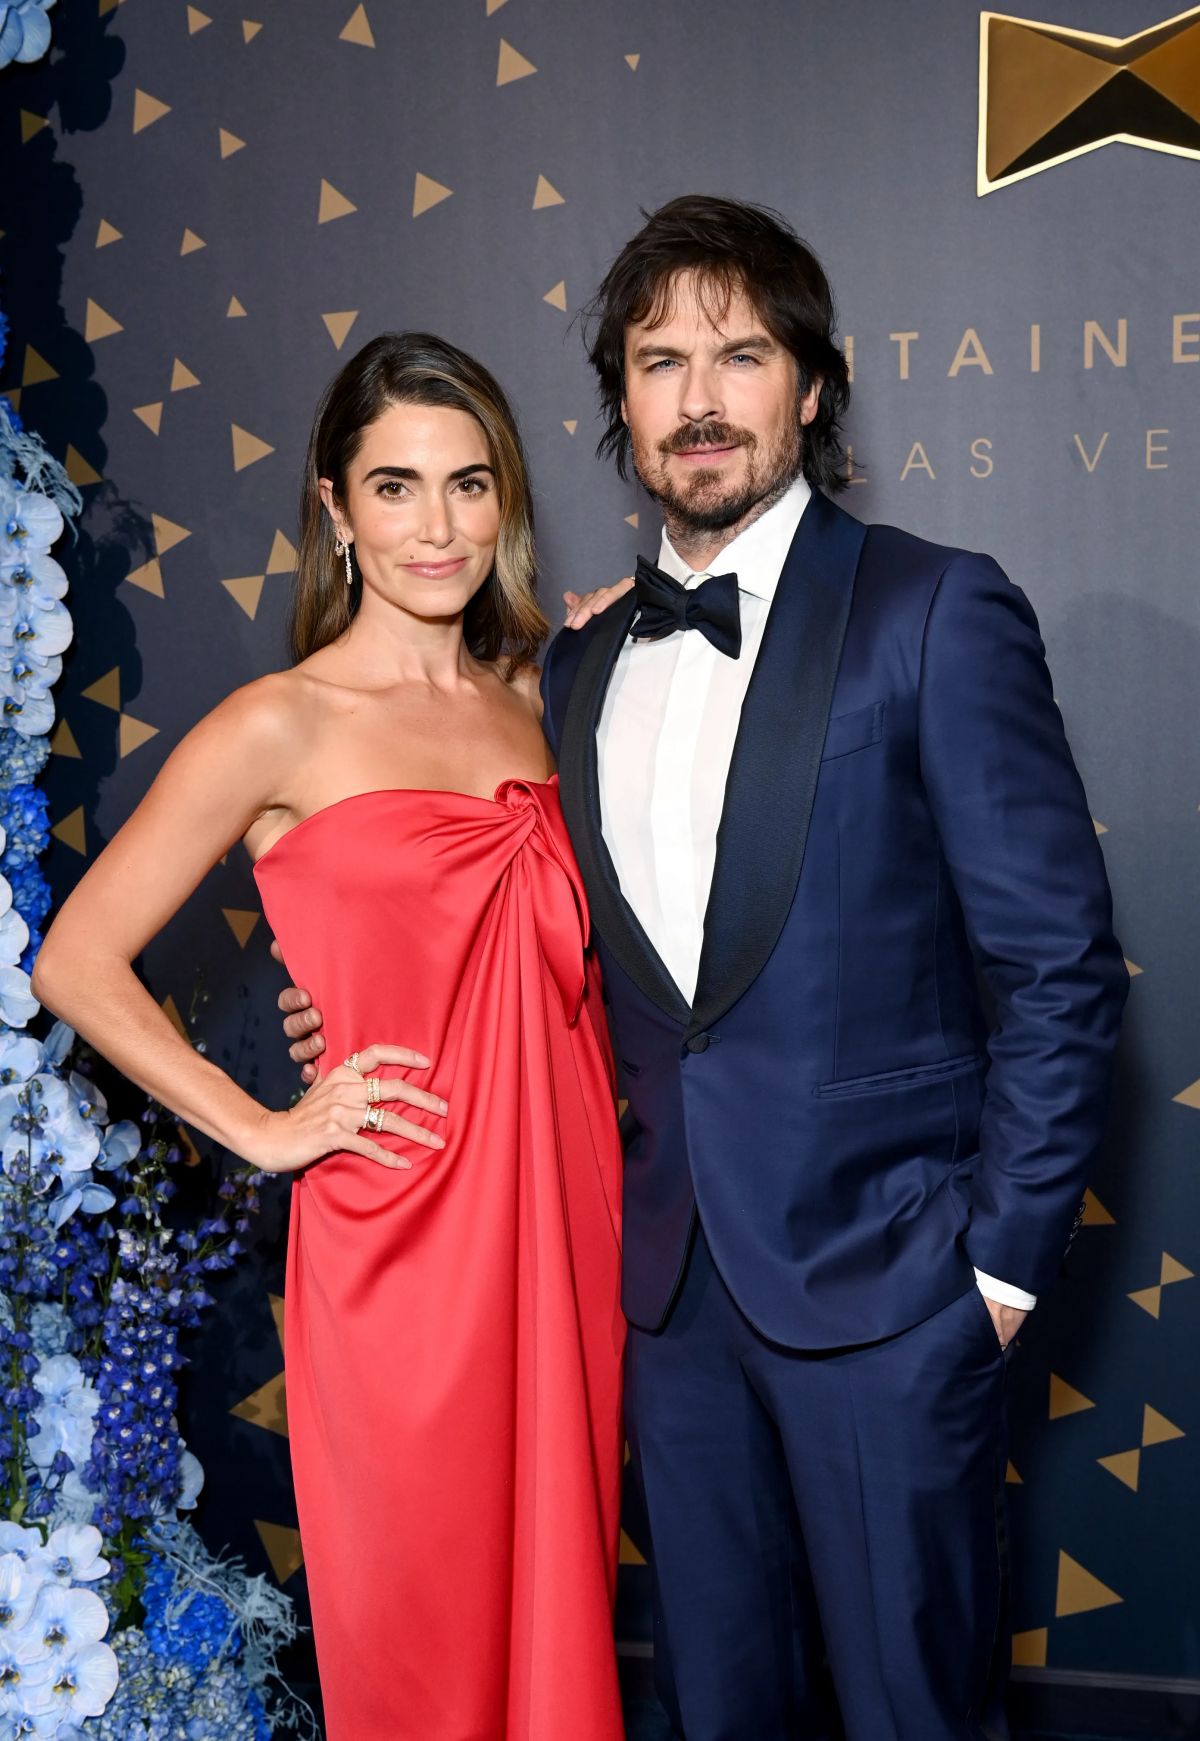 Nikki Reed and Ian Somerhalder attends at Fontainebleau Las Vegas Grand Opening